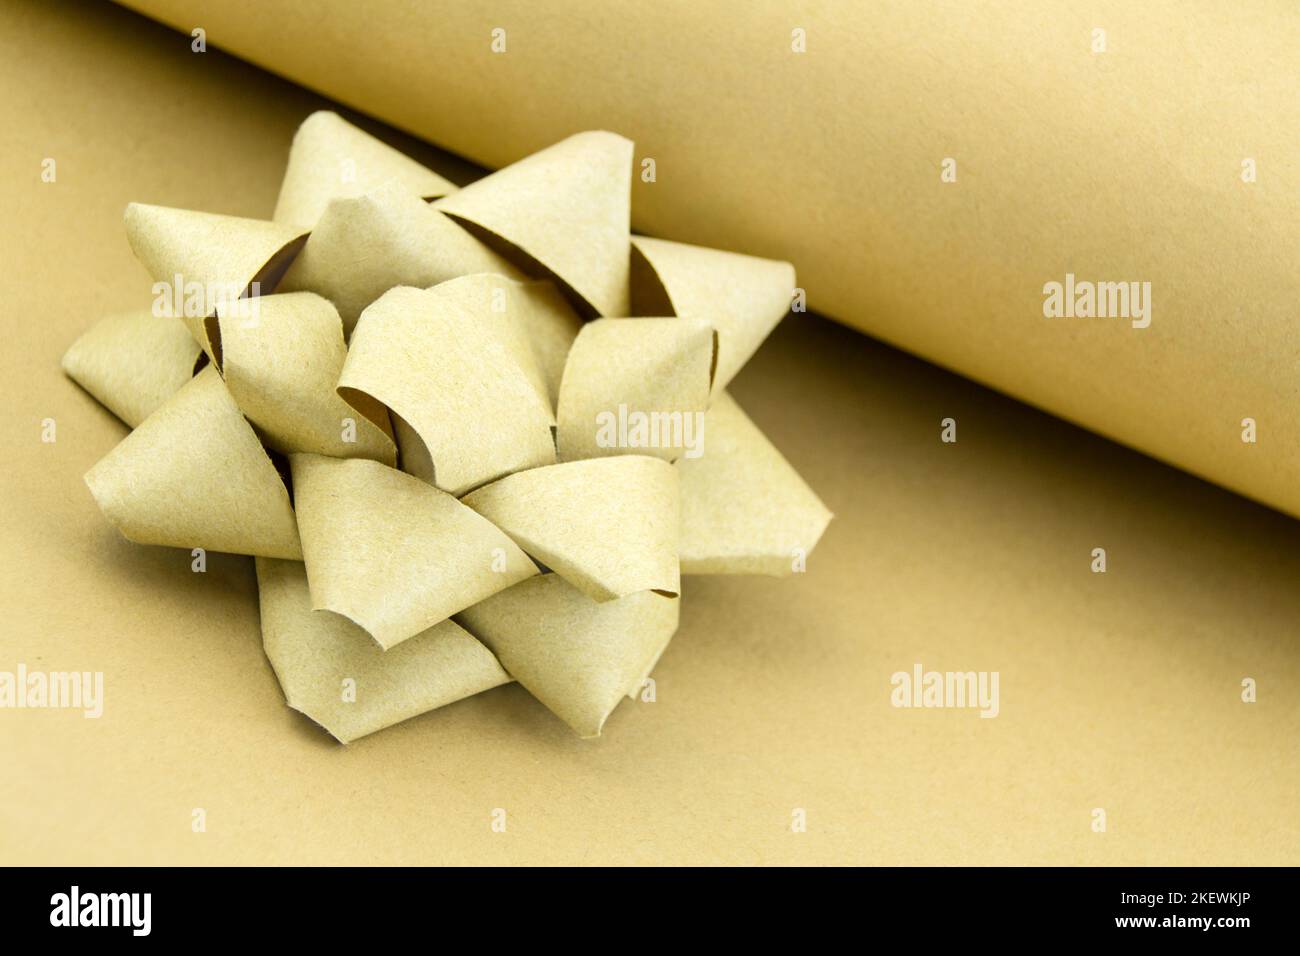 Eco-friendly recyclable natural decoration and gift wrap products Stock Photo